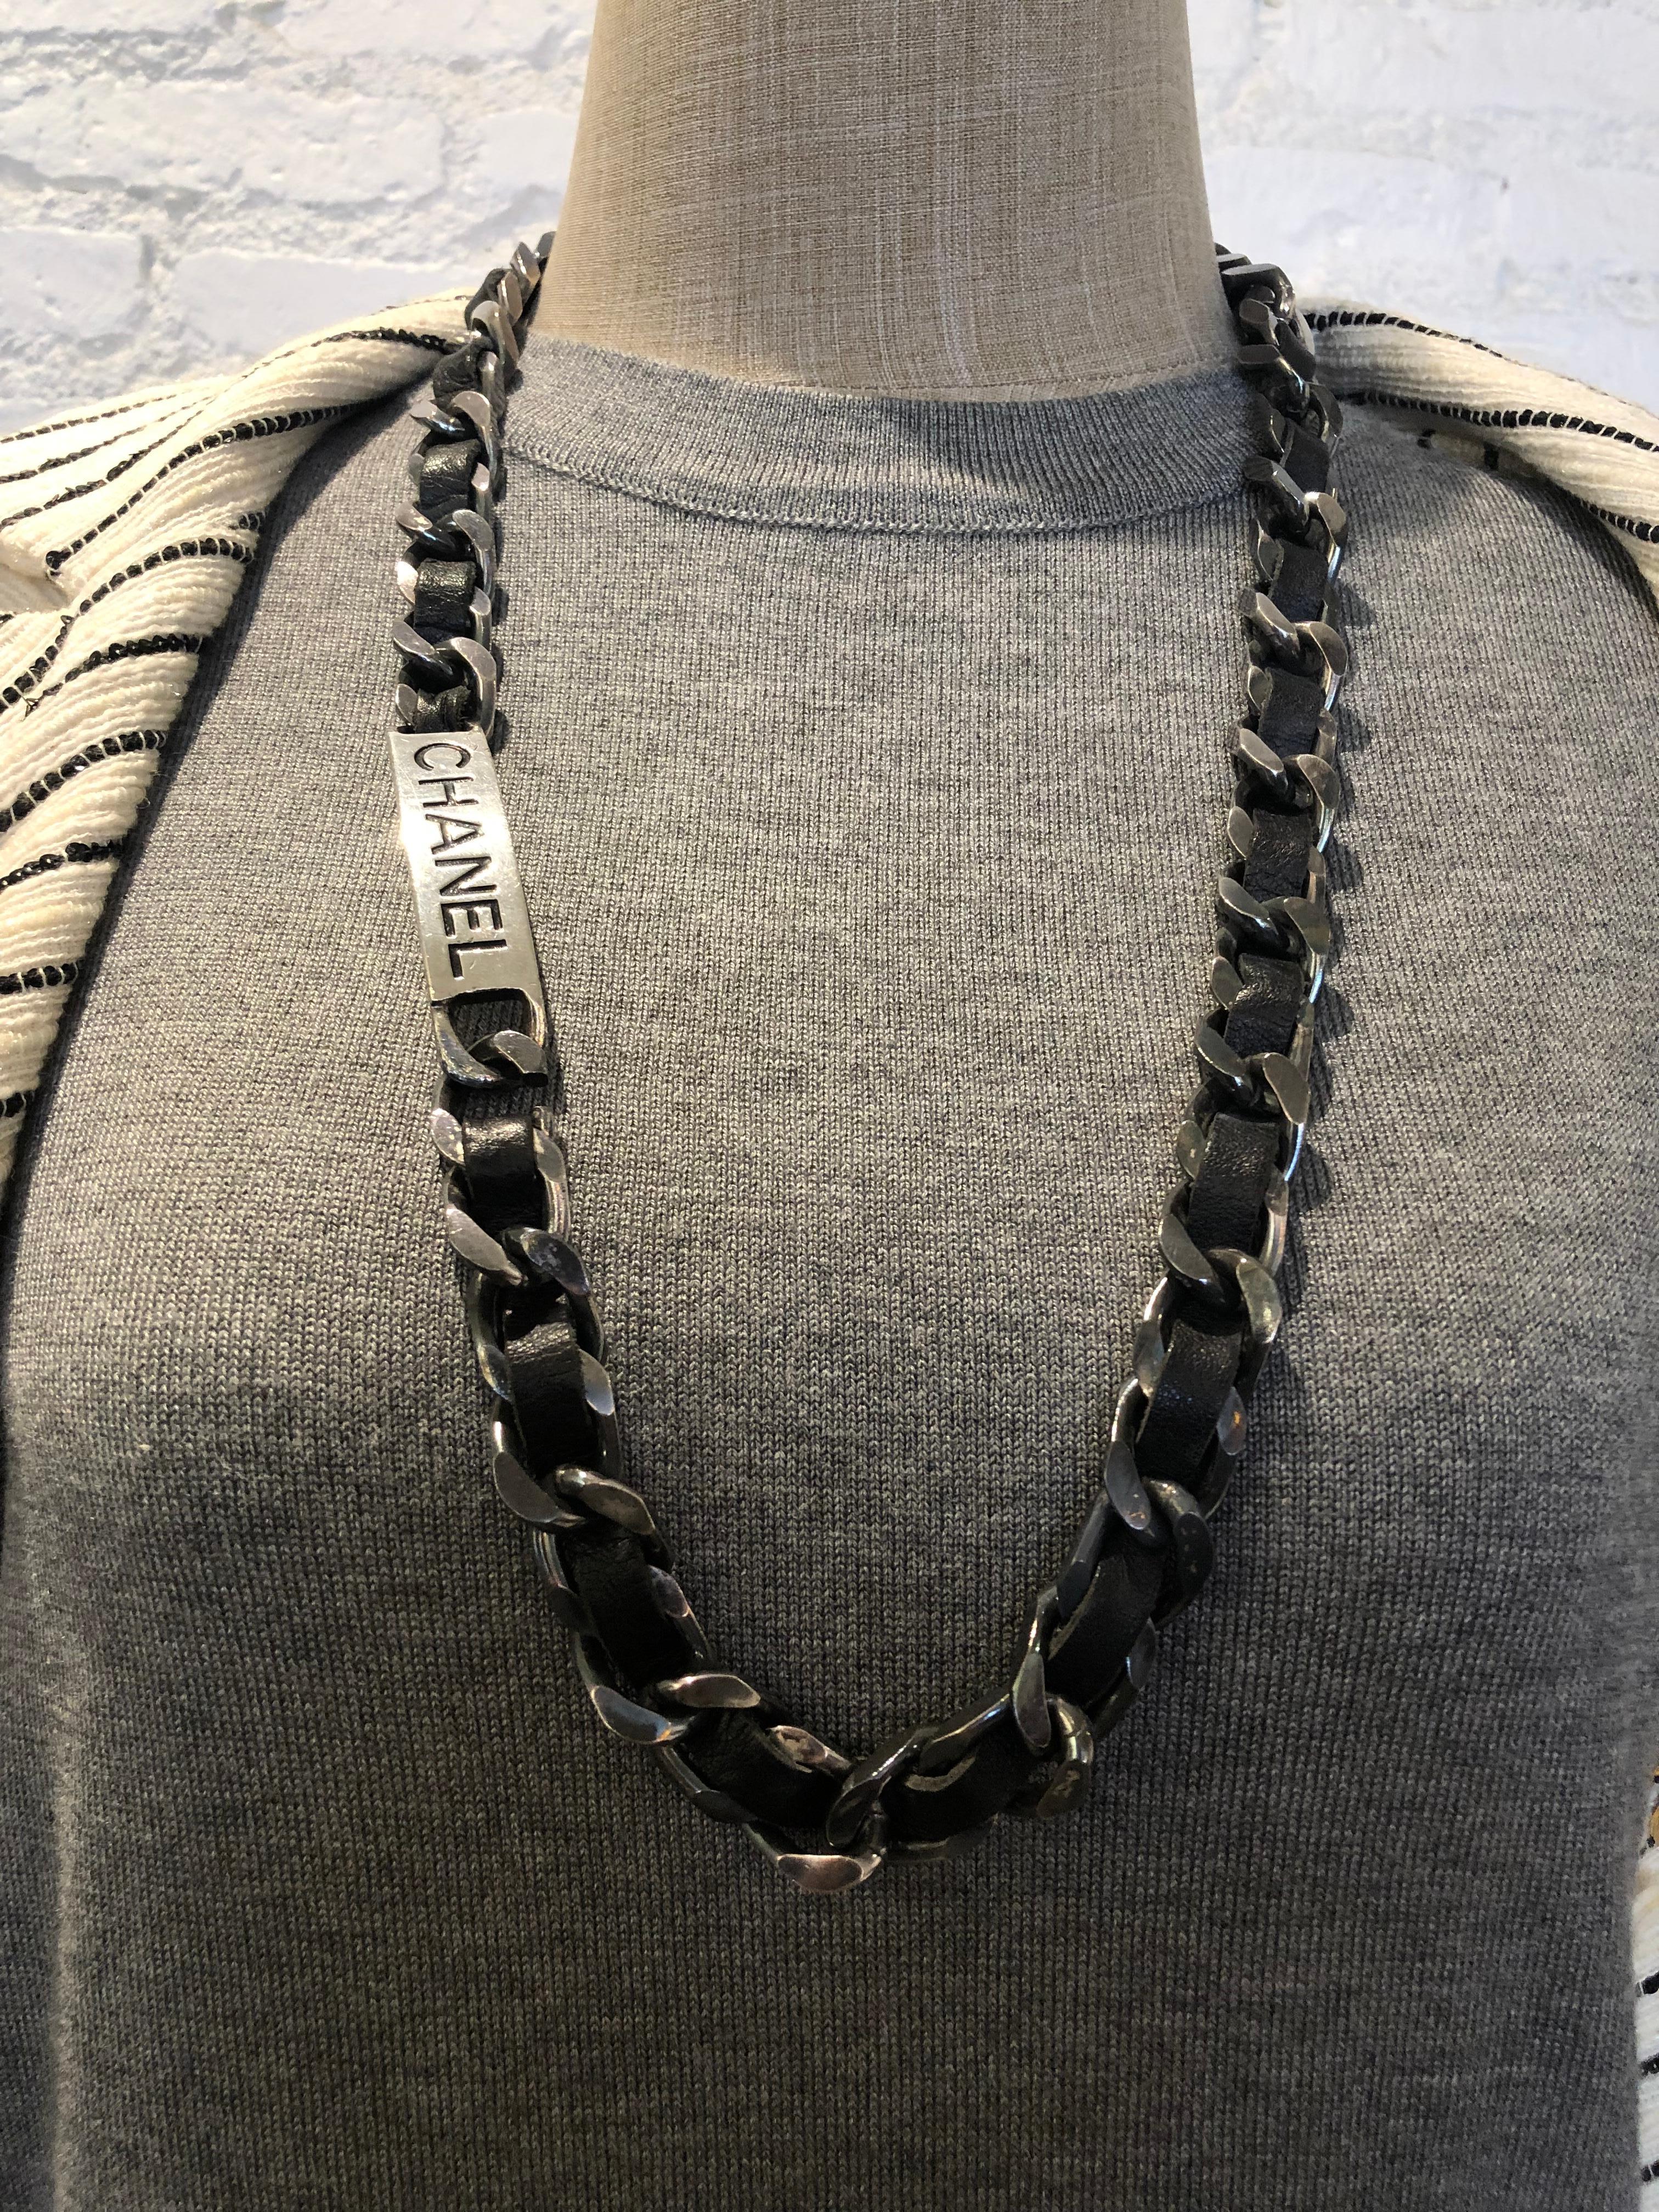 1995 Vintage CHANEL Silver Toned Black Leather Chain Belt Necklace 1